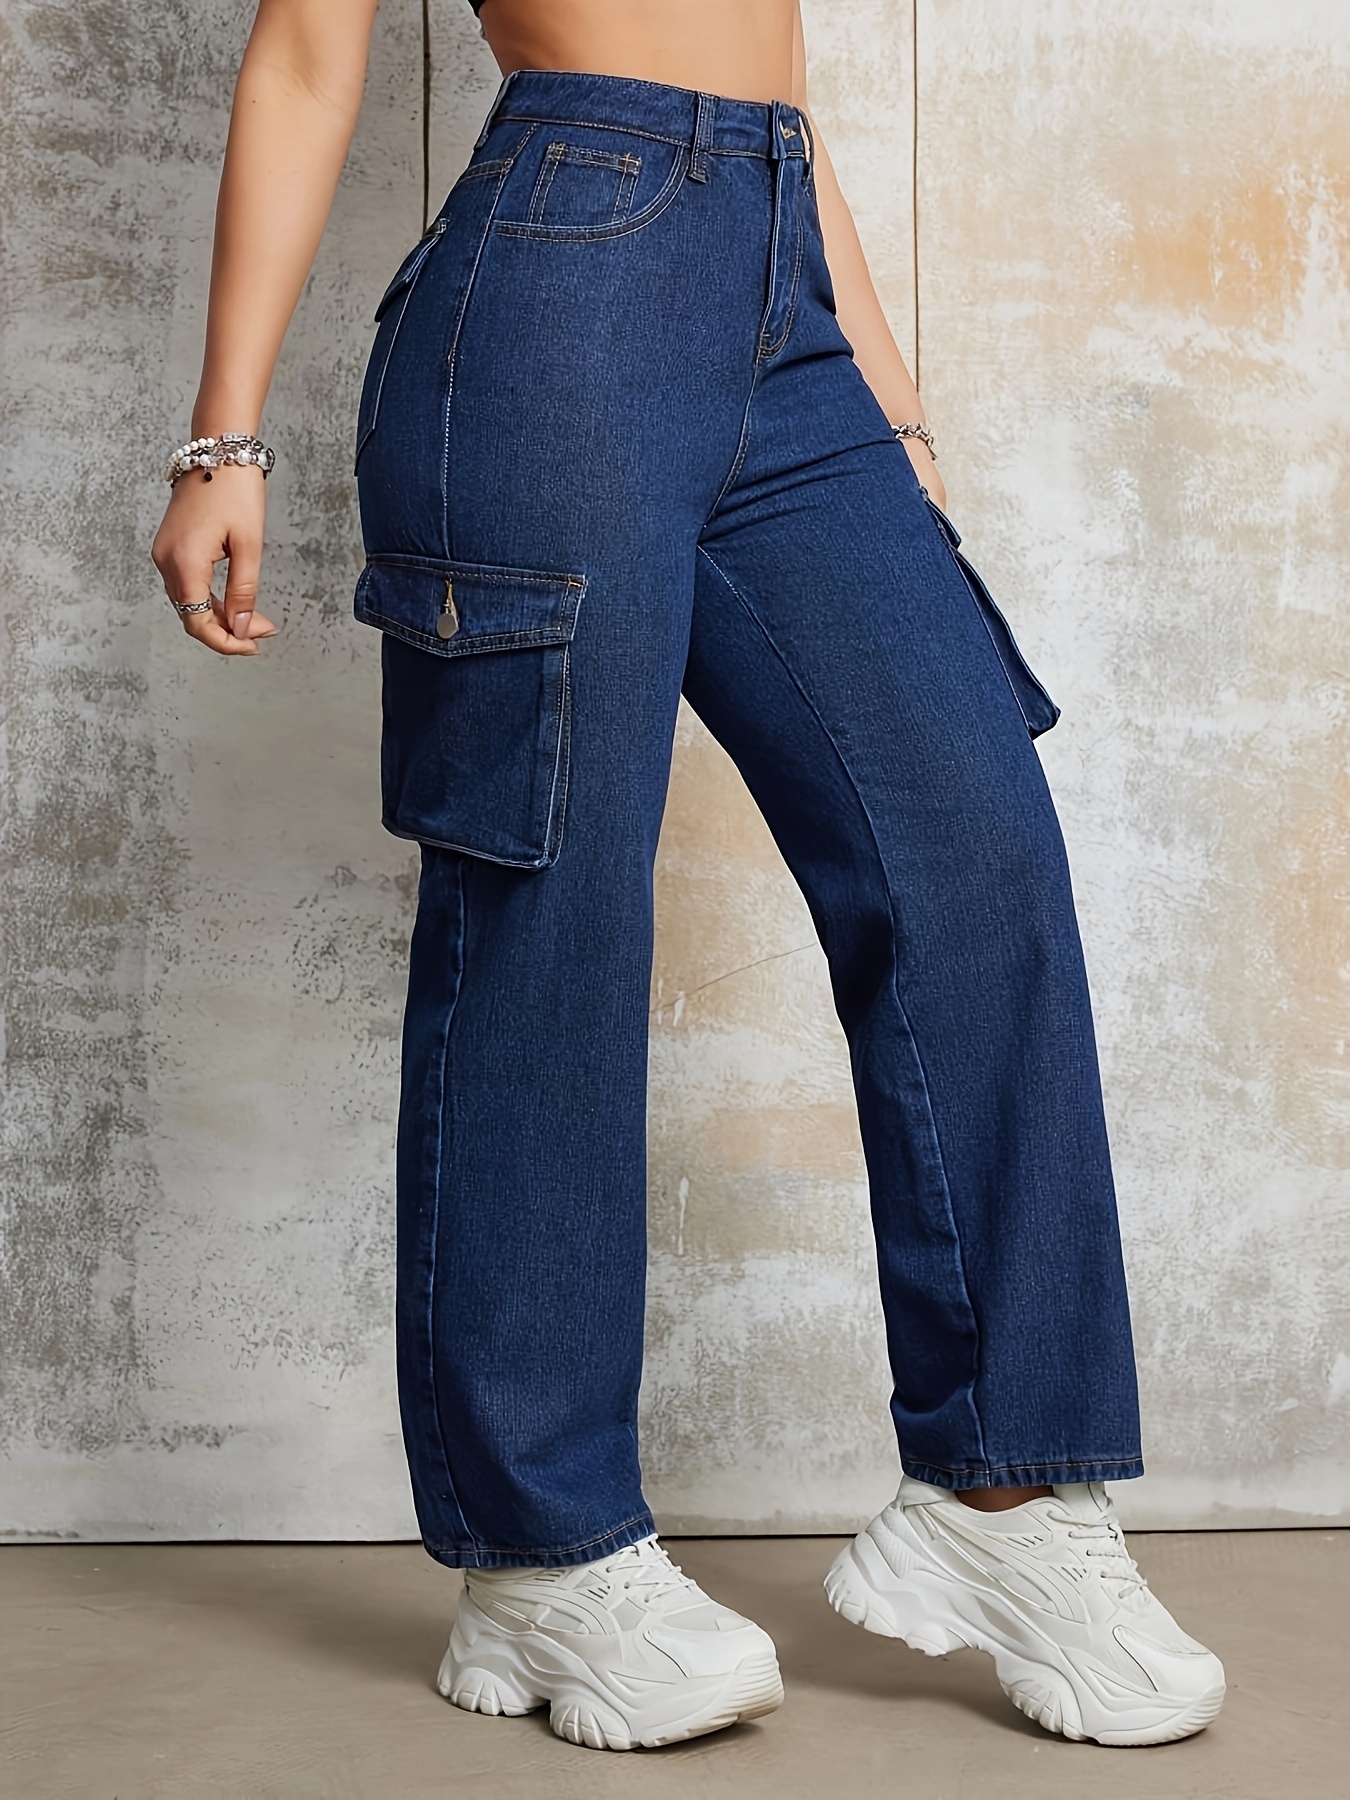 Flap Pockets Casual Cargo Pants, Loose Fit High Waist Y2K & Kpop Style  Straight Jeans, Women's Denim Jeans & Clothing